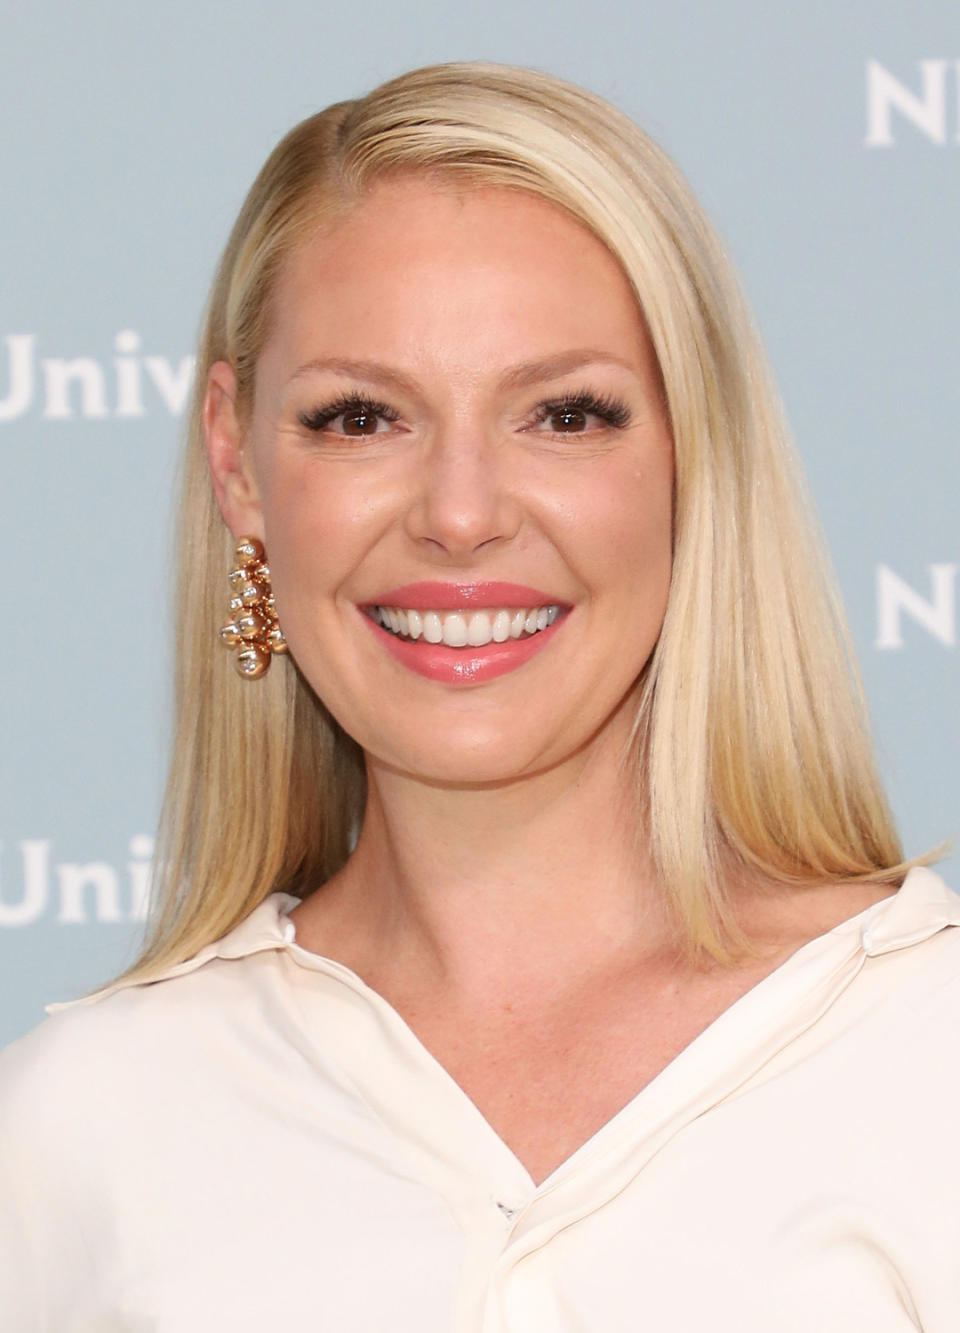 Katherine Heigl attends the 2018 NBCUniversal Upfront Presentation at Rockefeller Center on May 14, 2018 in New York City